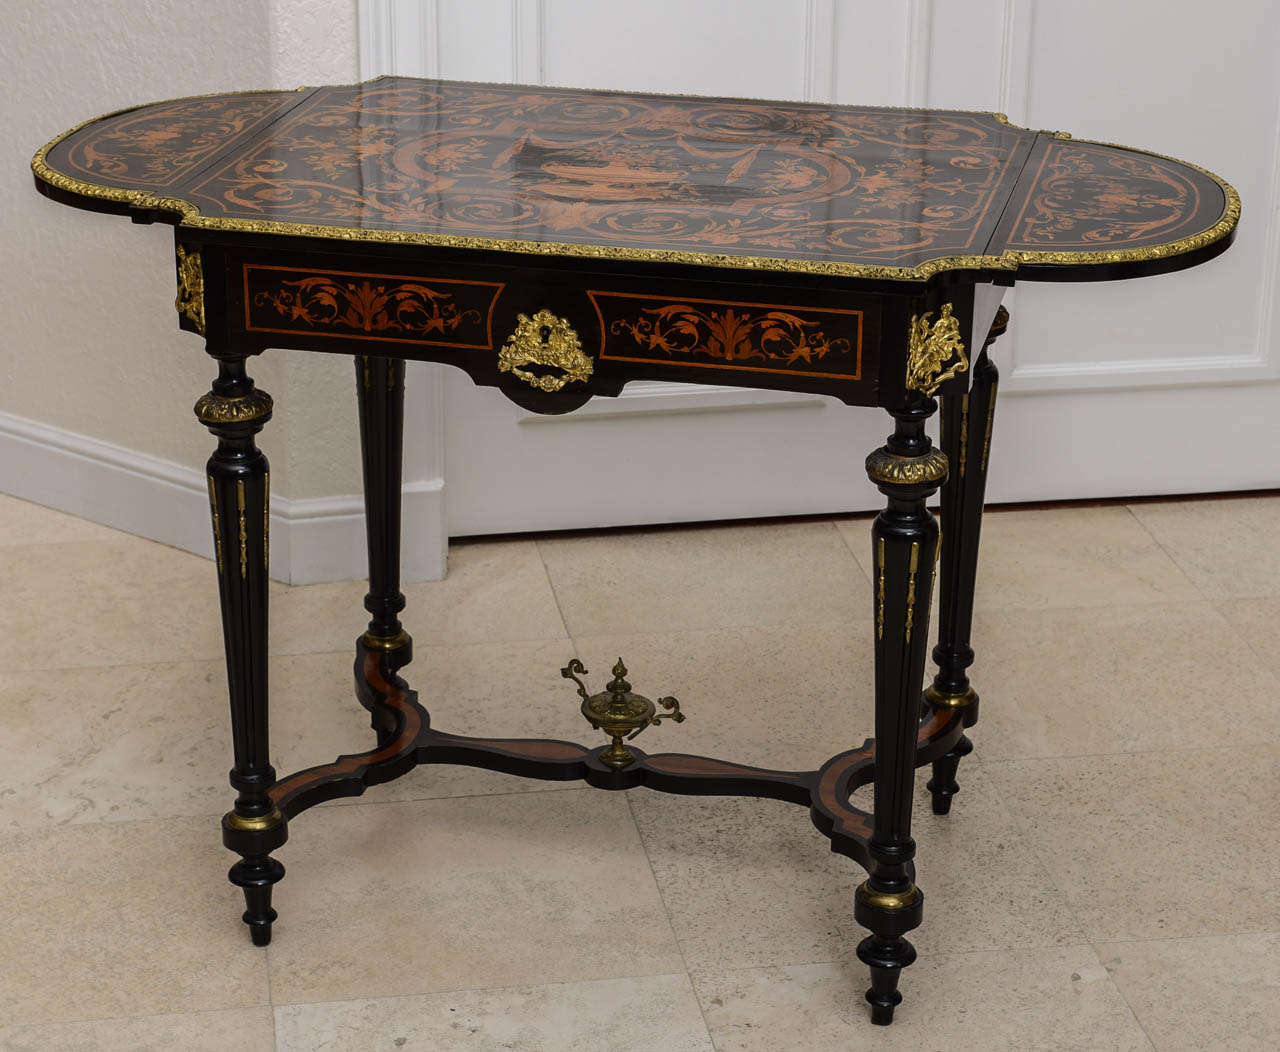 French Drop-Leaf Center Table, Vanity, or Desk from the 19th Century For Sale 1